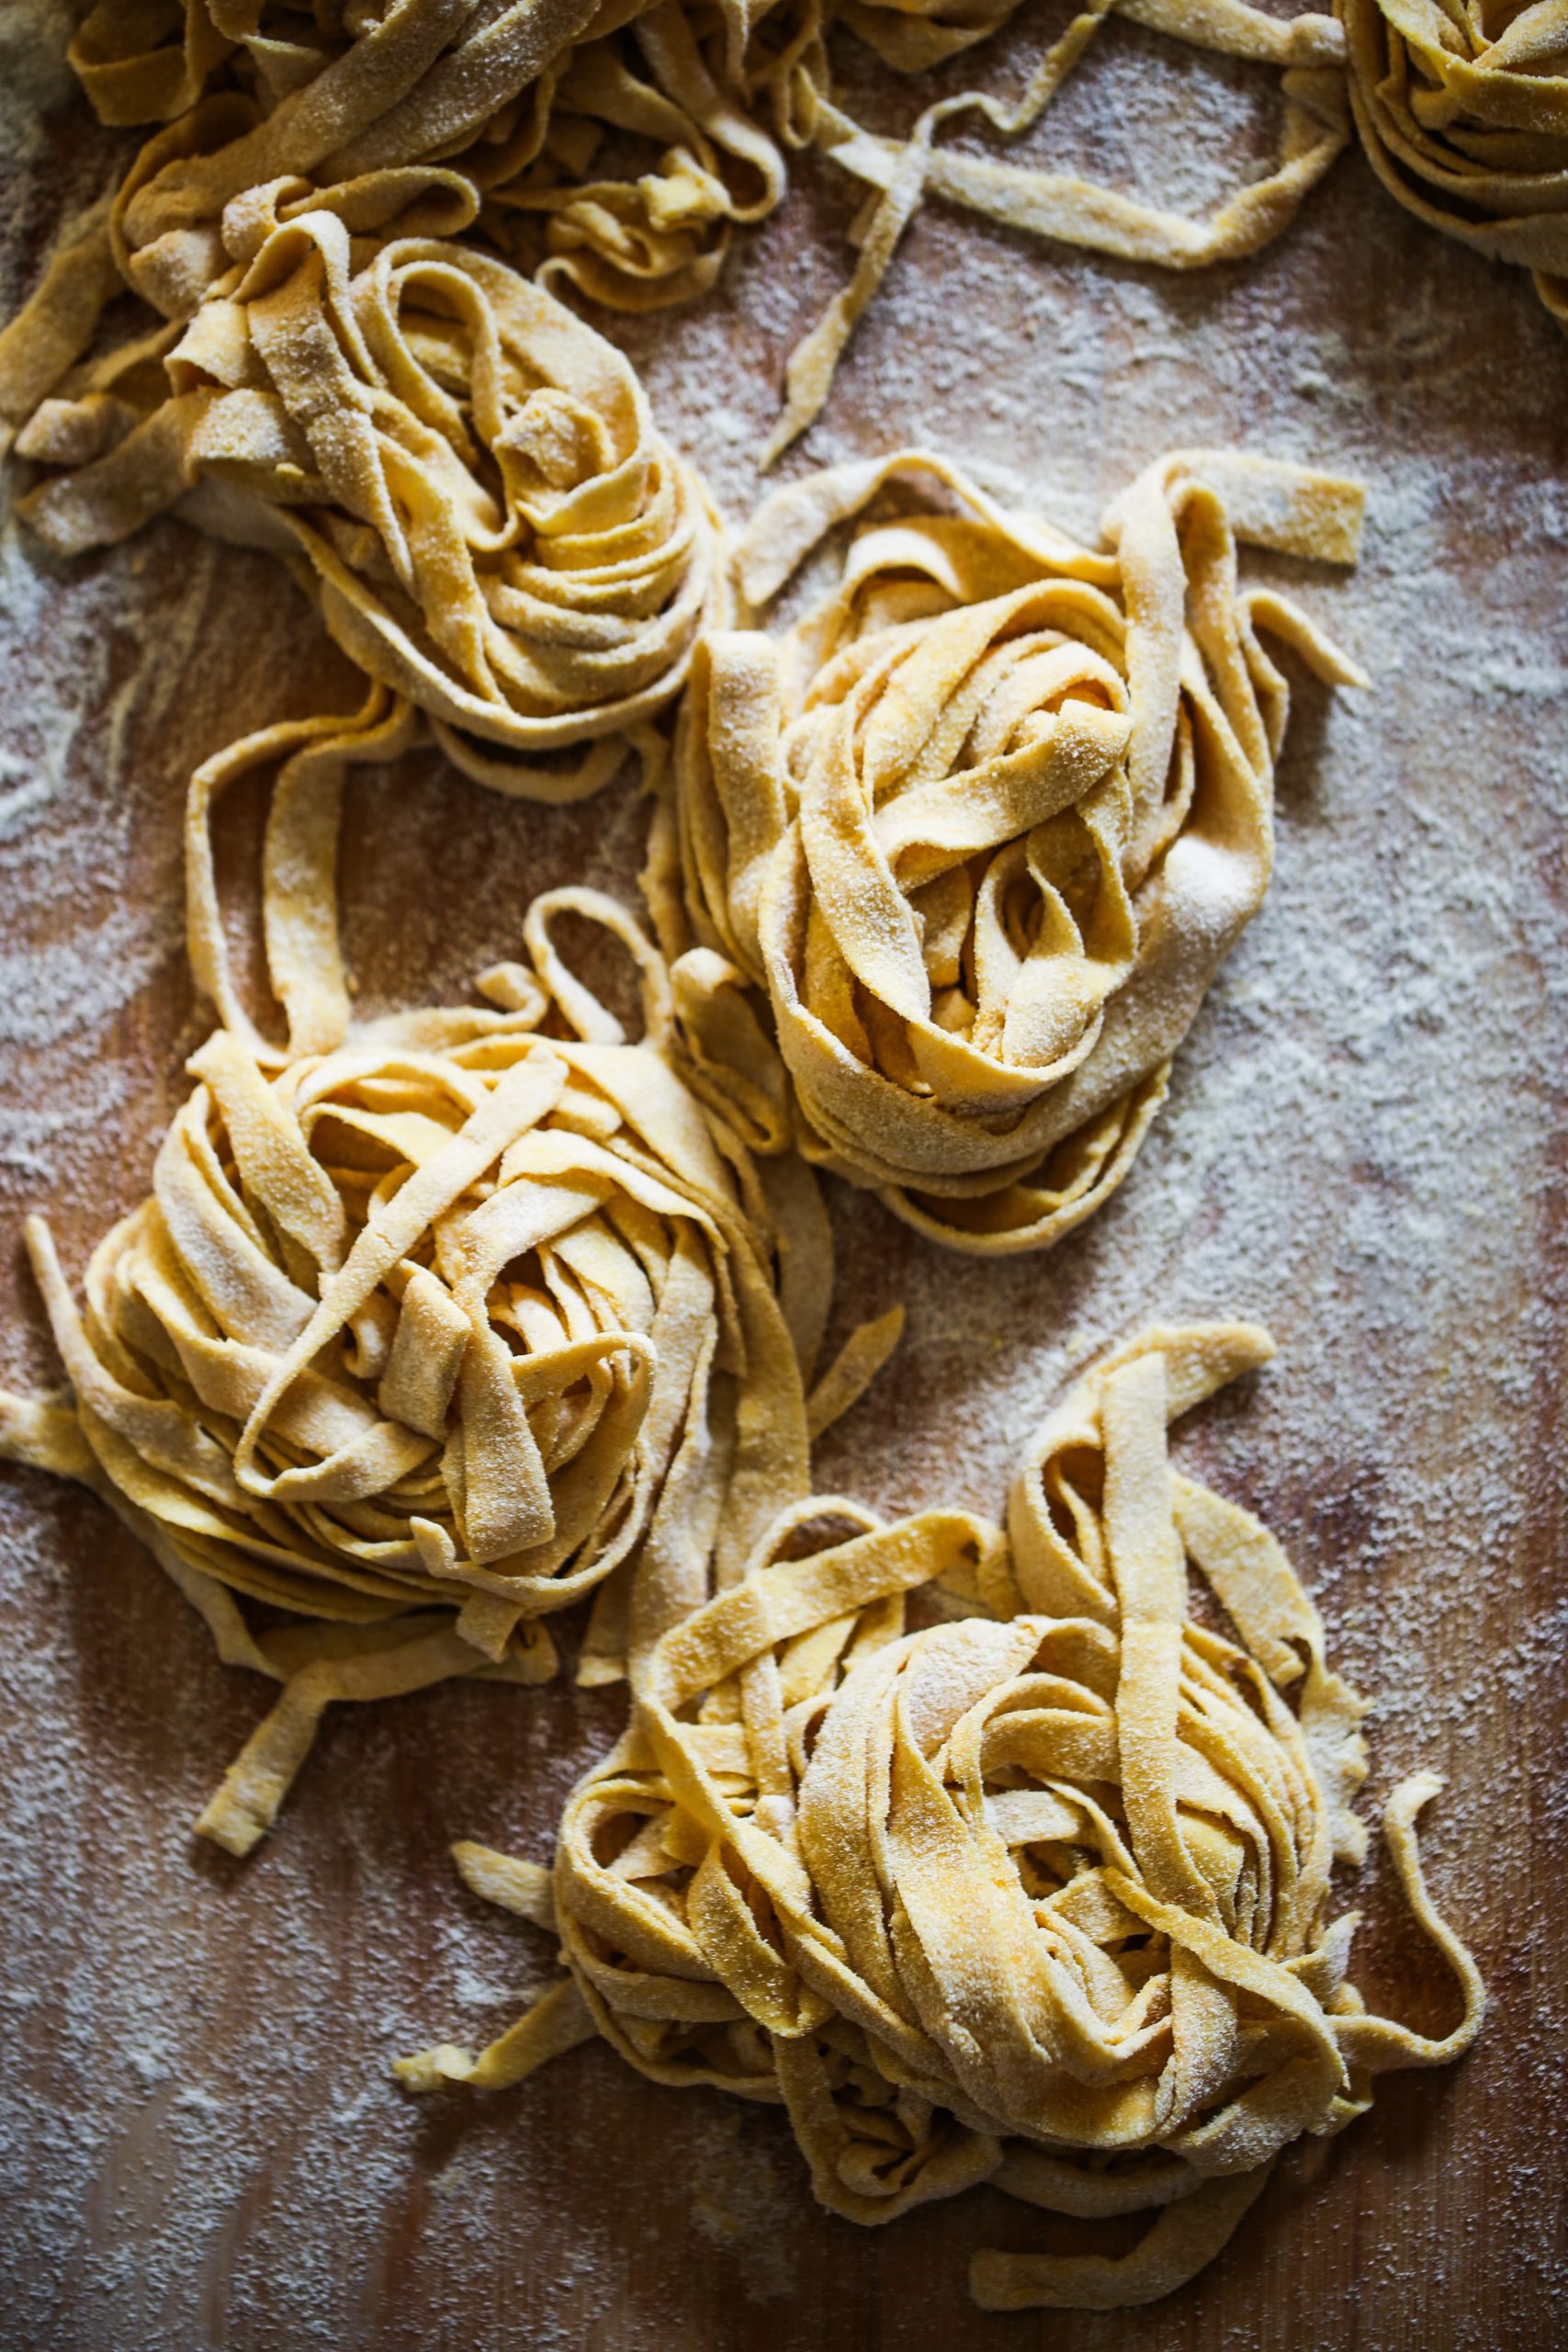 Homemade pasta on a brown table